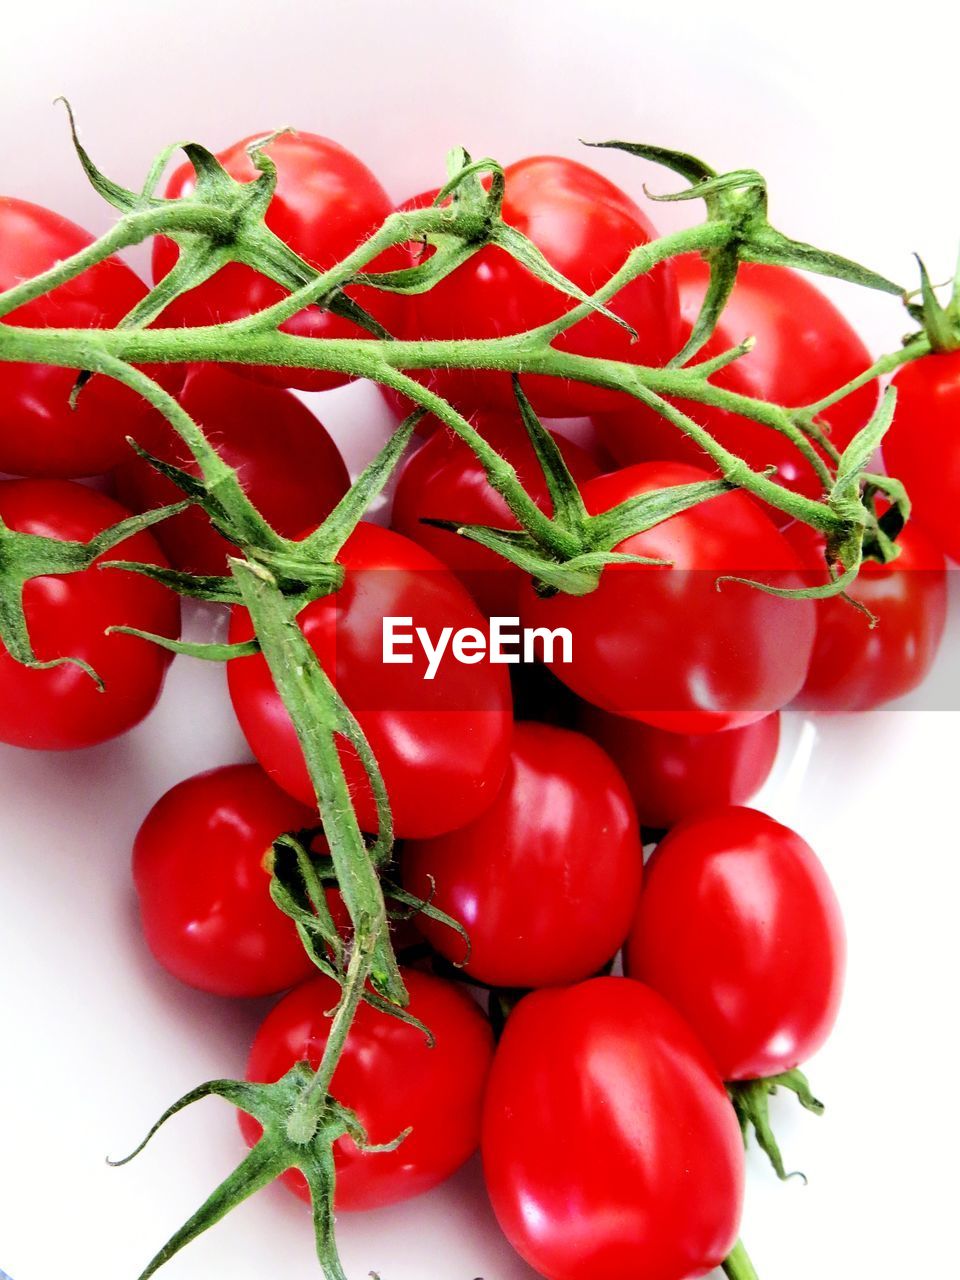 CLOSE-UP OF RED CHERRIES